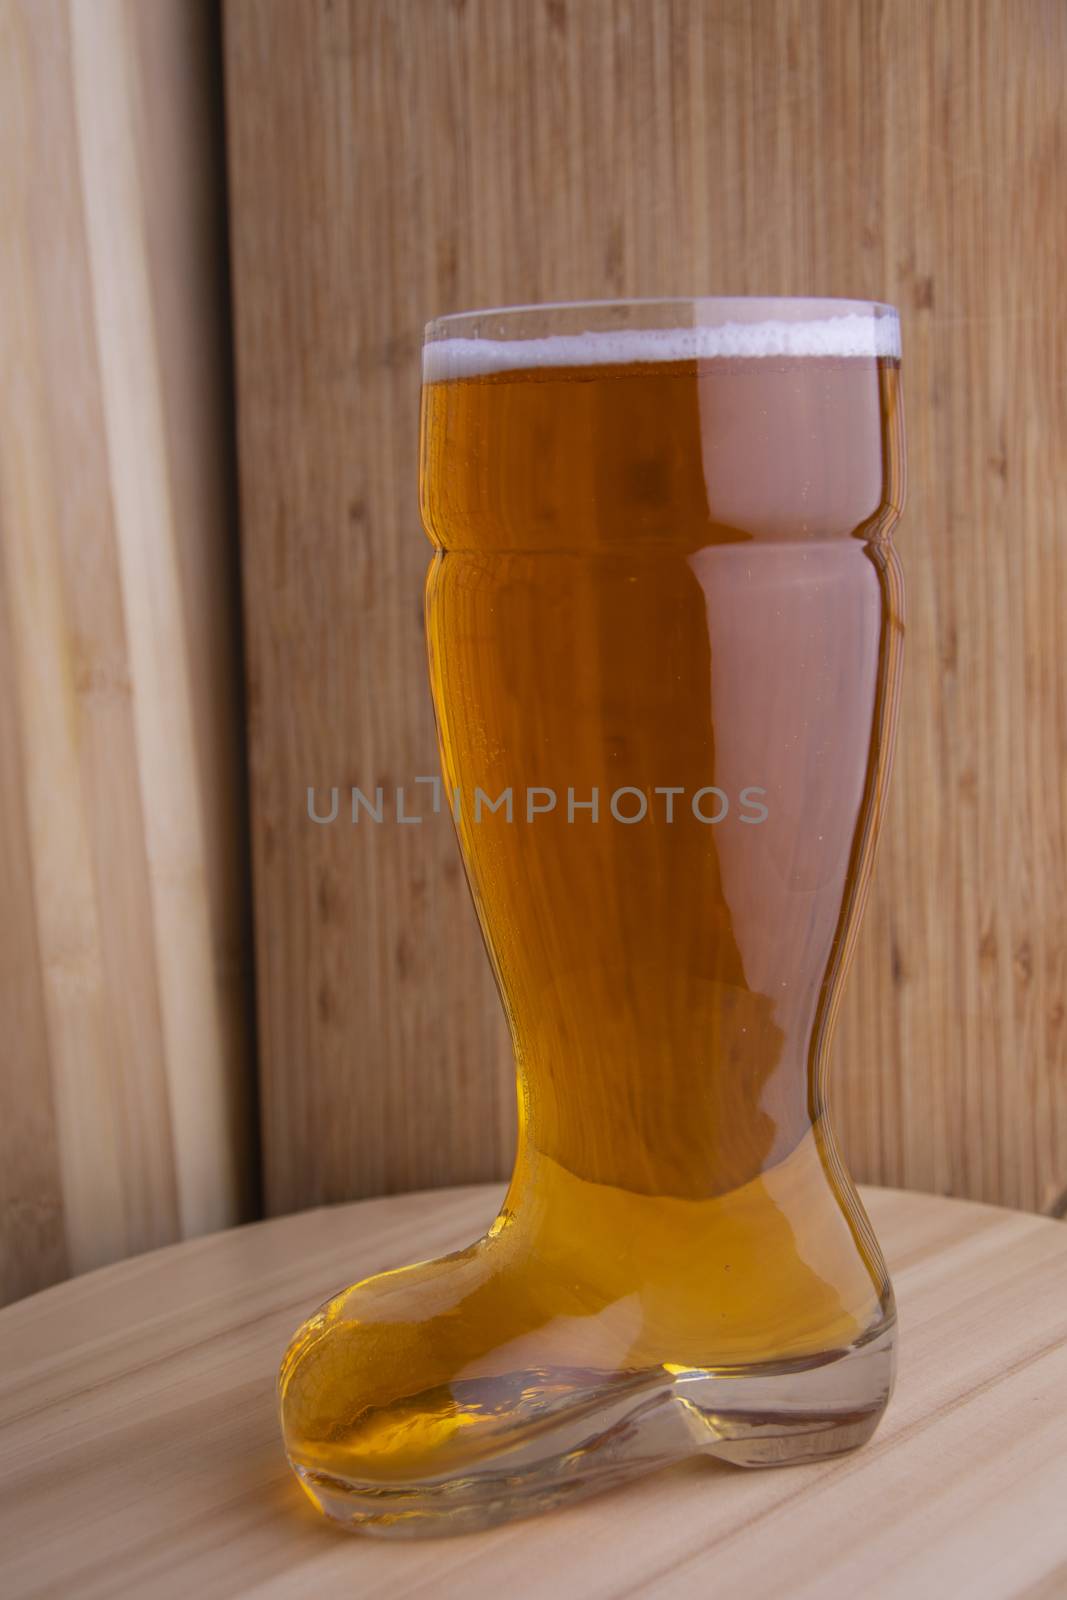 Beer in boot beer glass on a wooden board in wooden background by oasisamuel